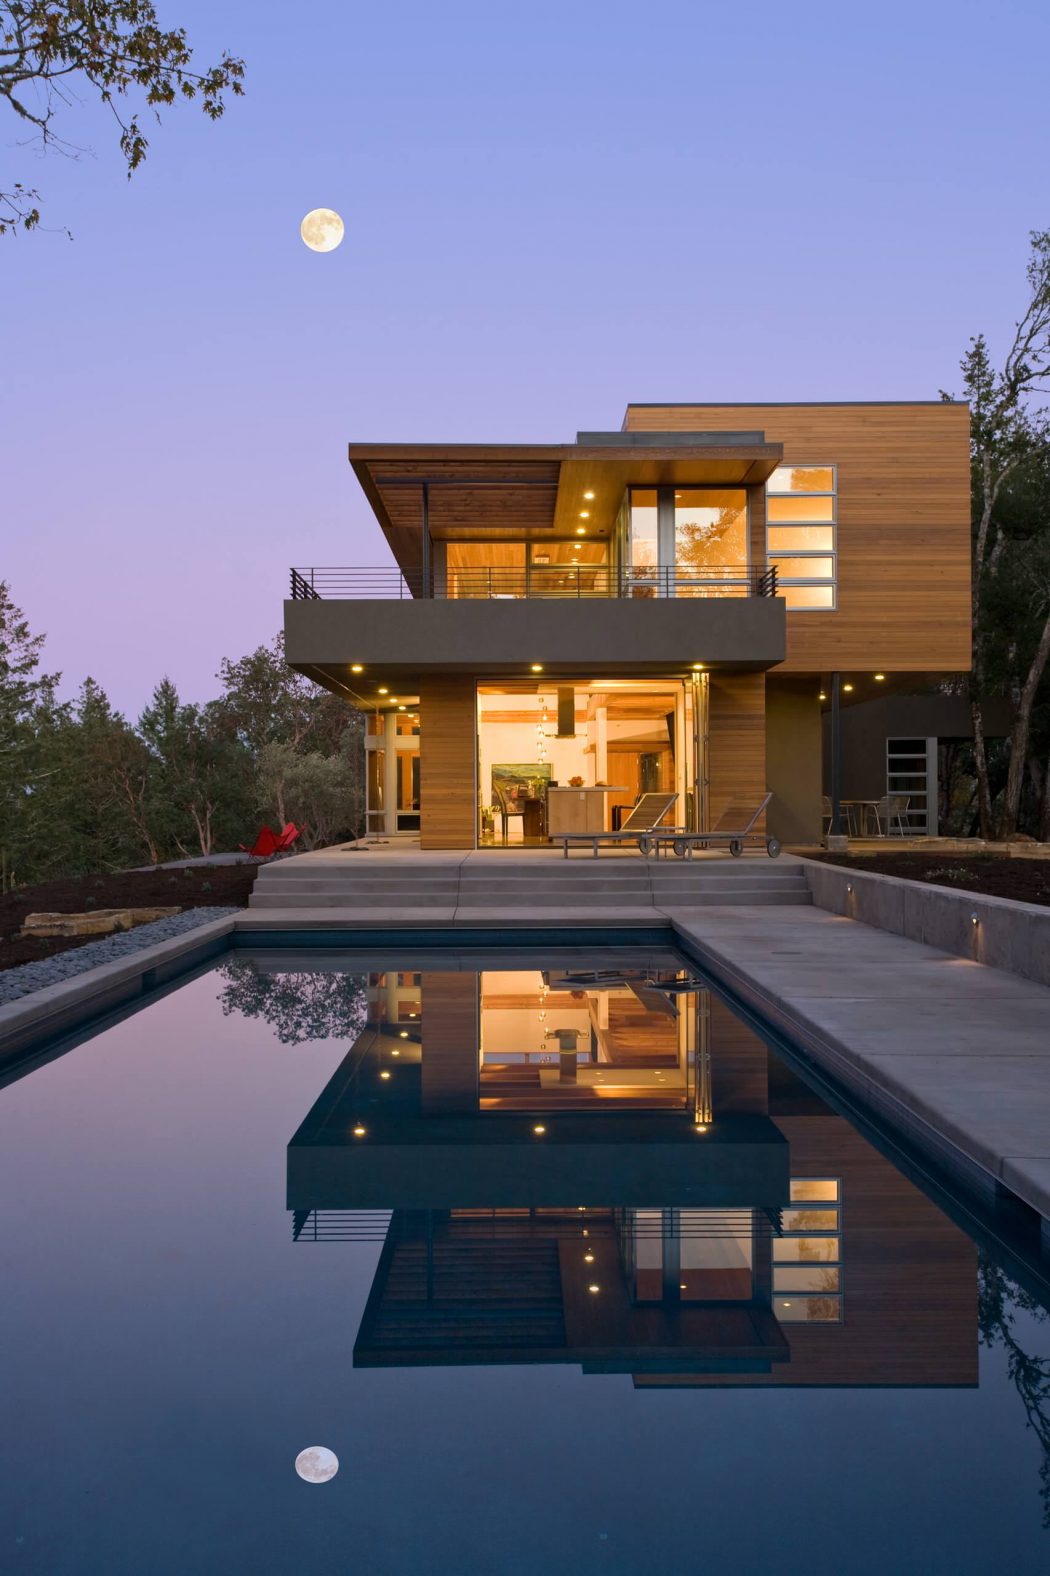 Modern wooden and glass home with a reflection pool, elevated deck, and full moon.